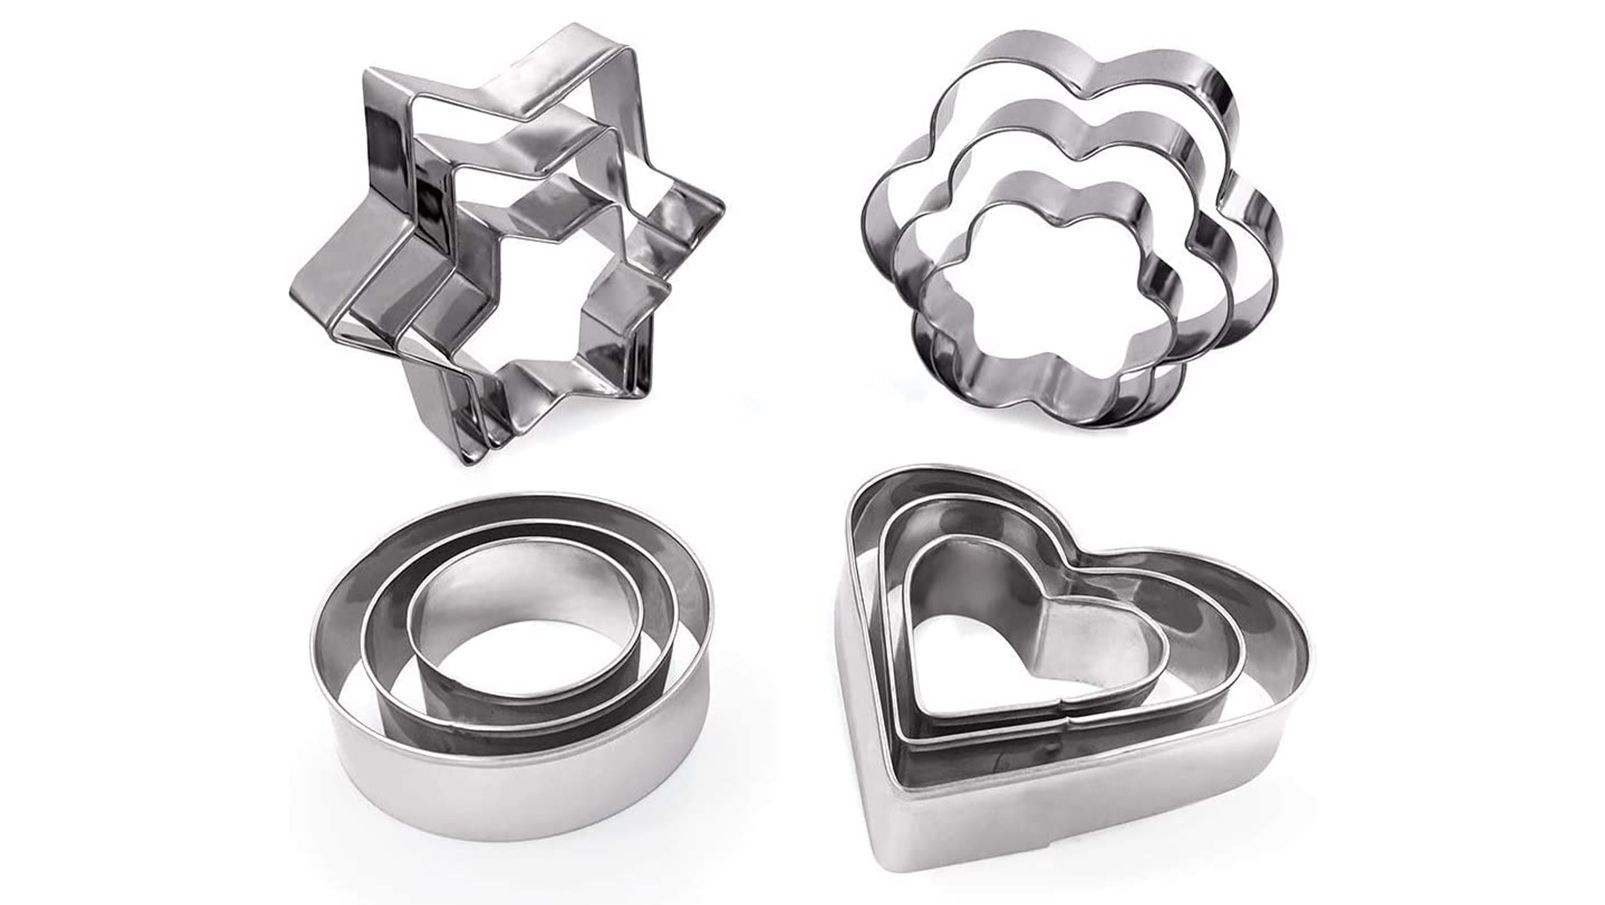 The best cookie cutters and cookie tools, recommended by baking